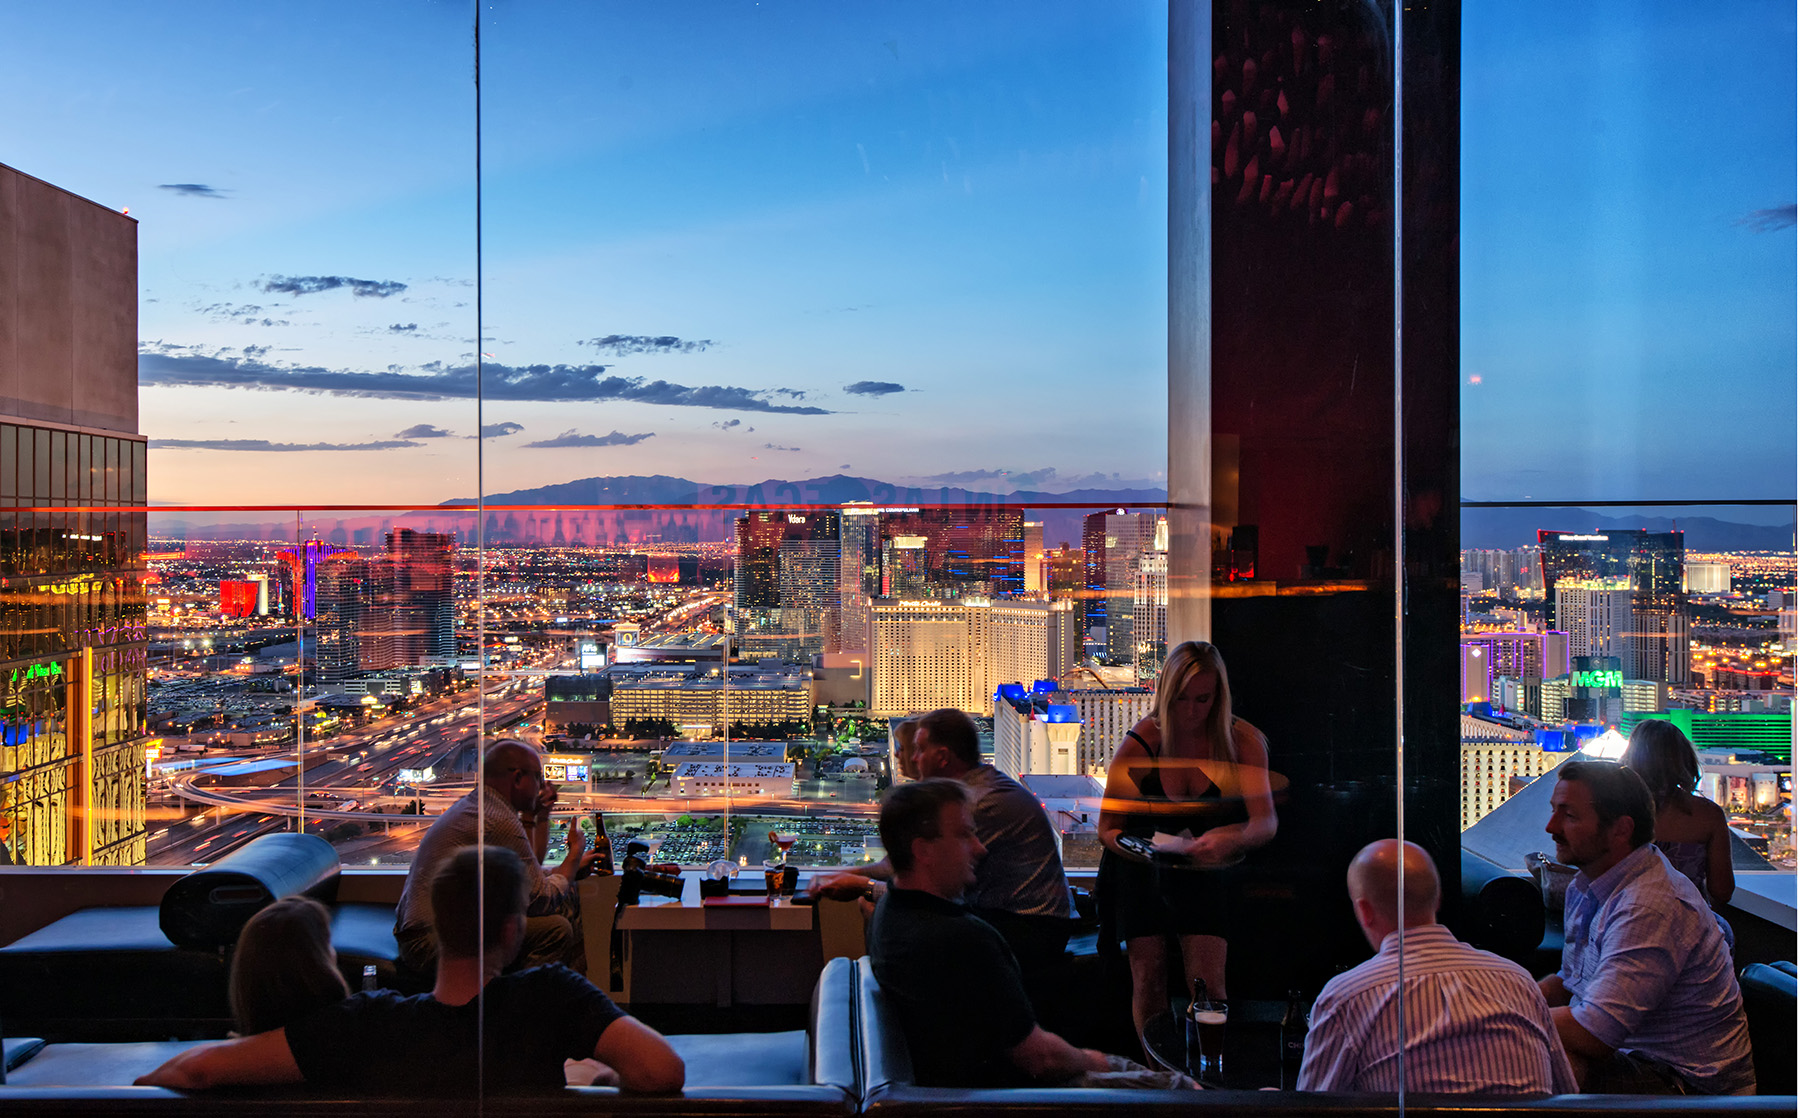 People enjoying drinks and cocktails at the THEHotel MiX Lounge terrace and Las Vegas Skyline at the blue Hour